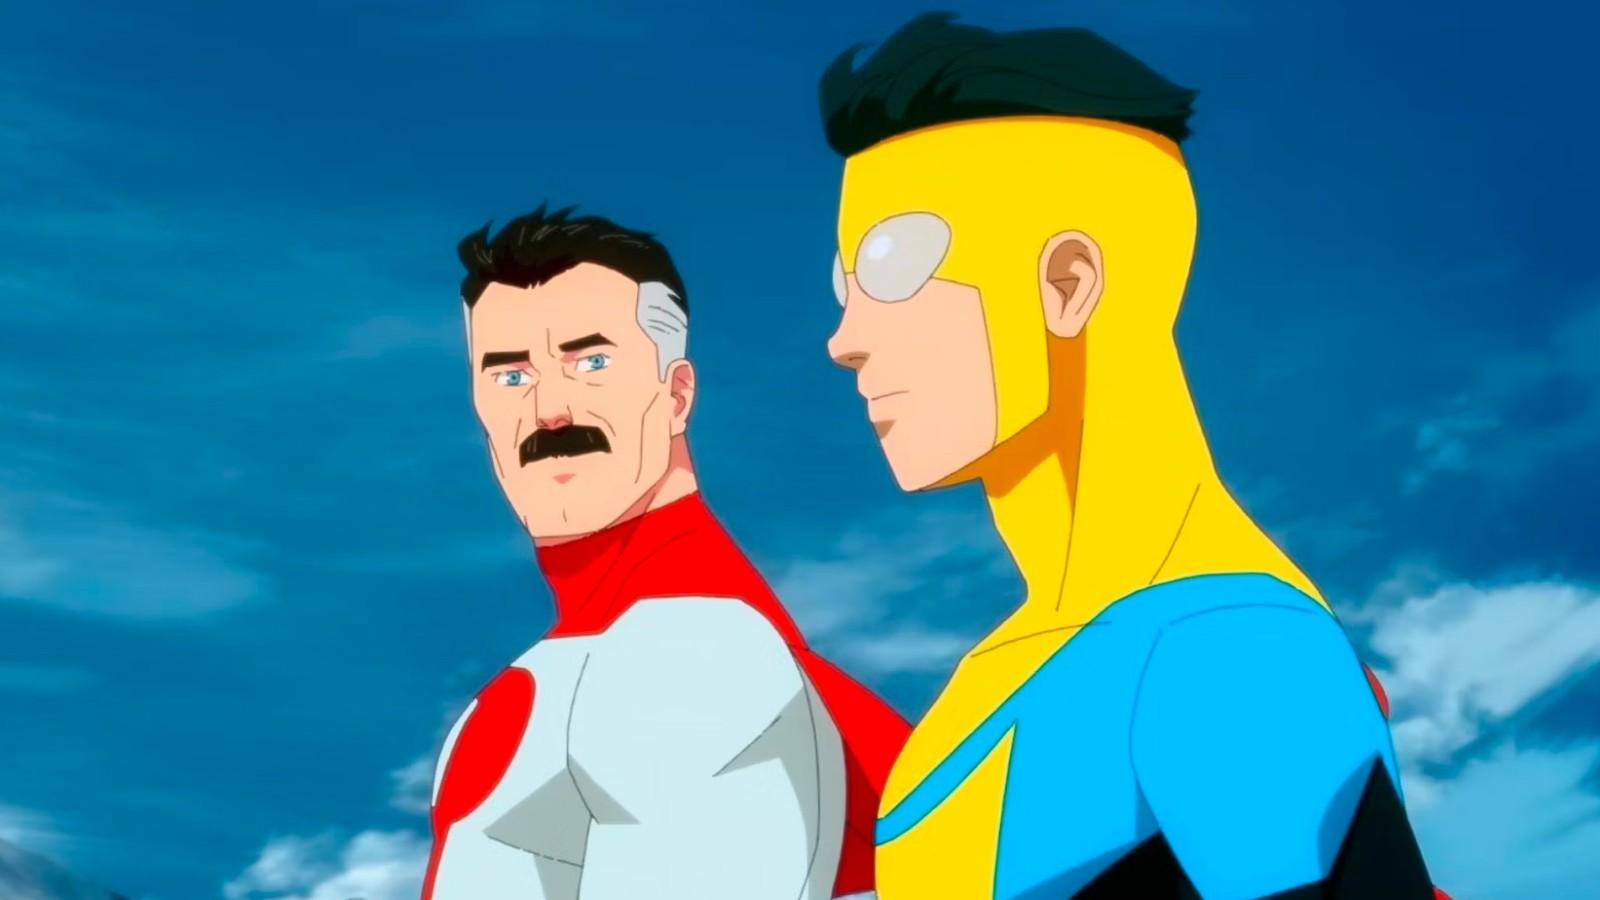 Invincible: Seth Rogen says show has influenced movie “a lot” - Dexerto